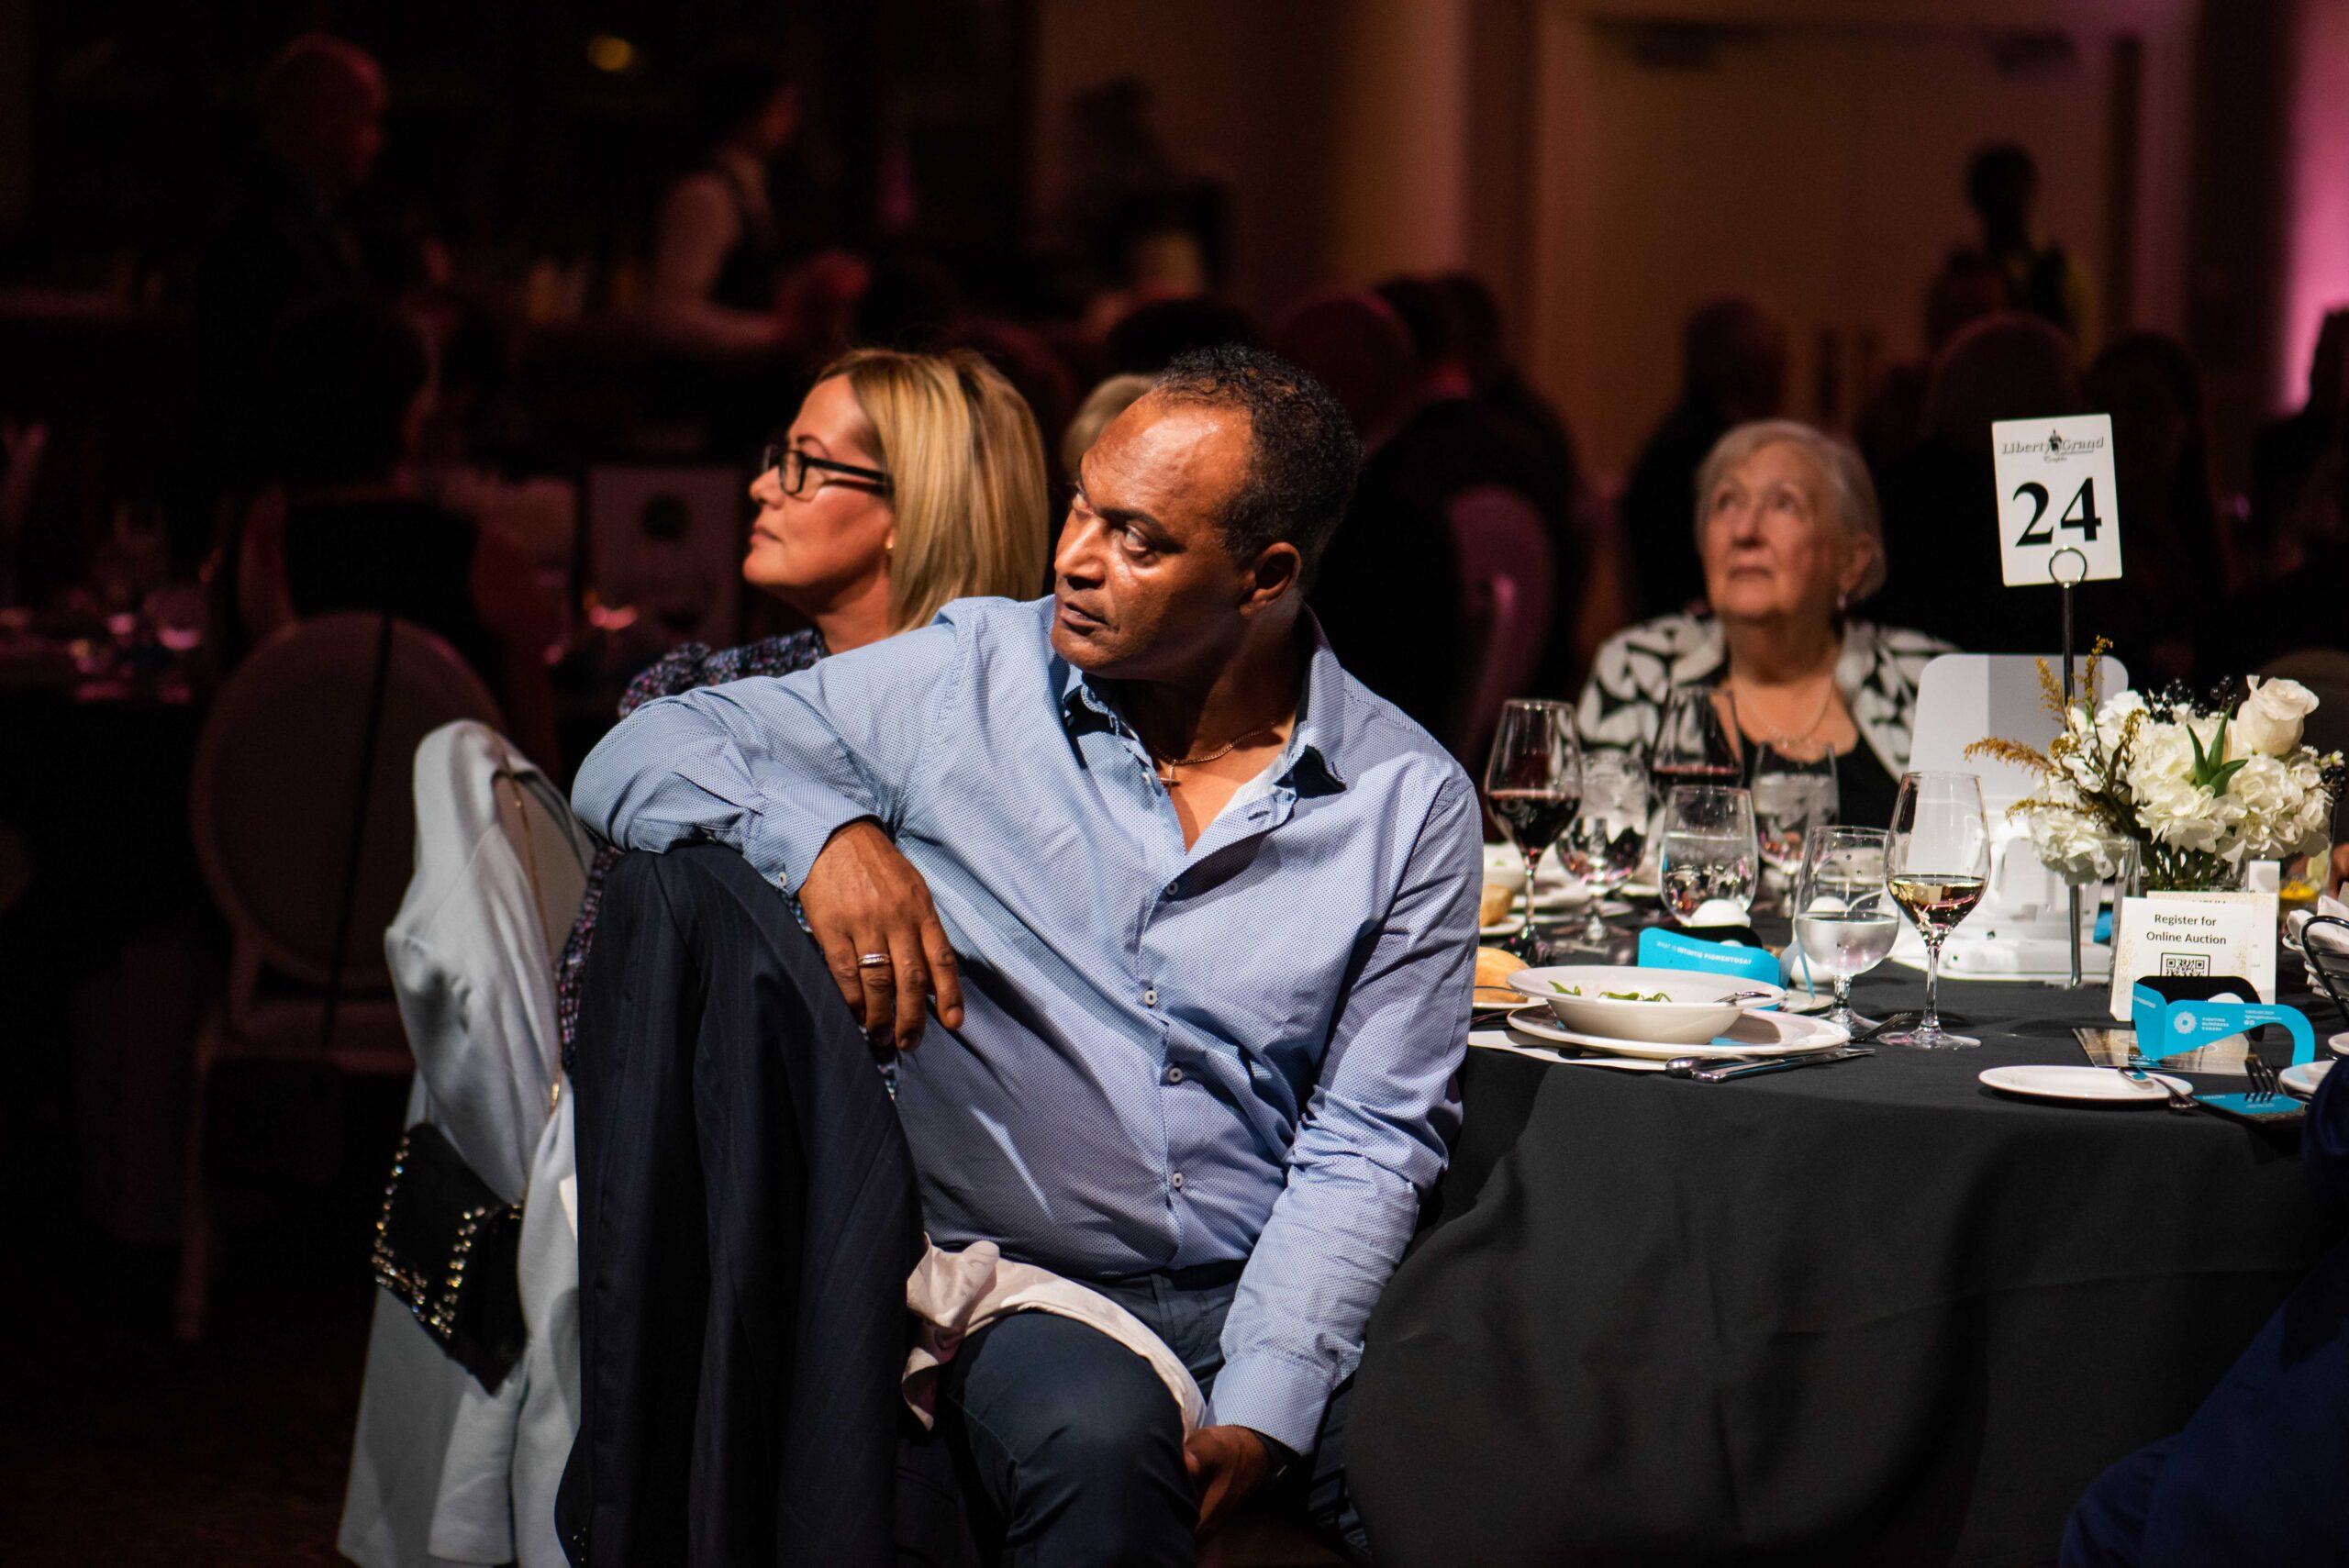 Image is of a Comic Vision event attendee listening to a guest speaker while seated at dinner.